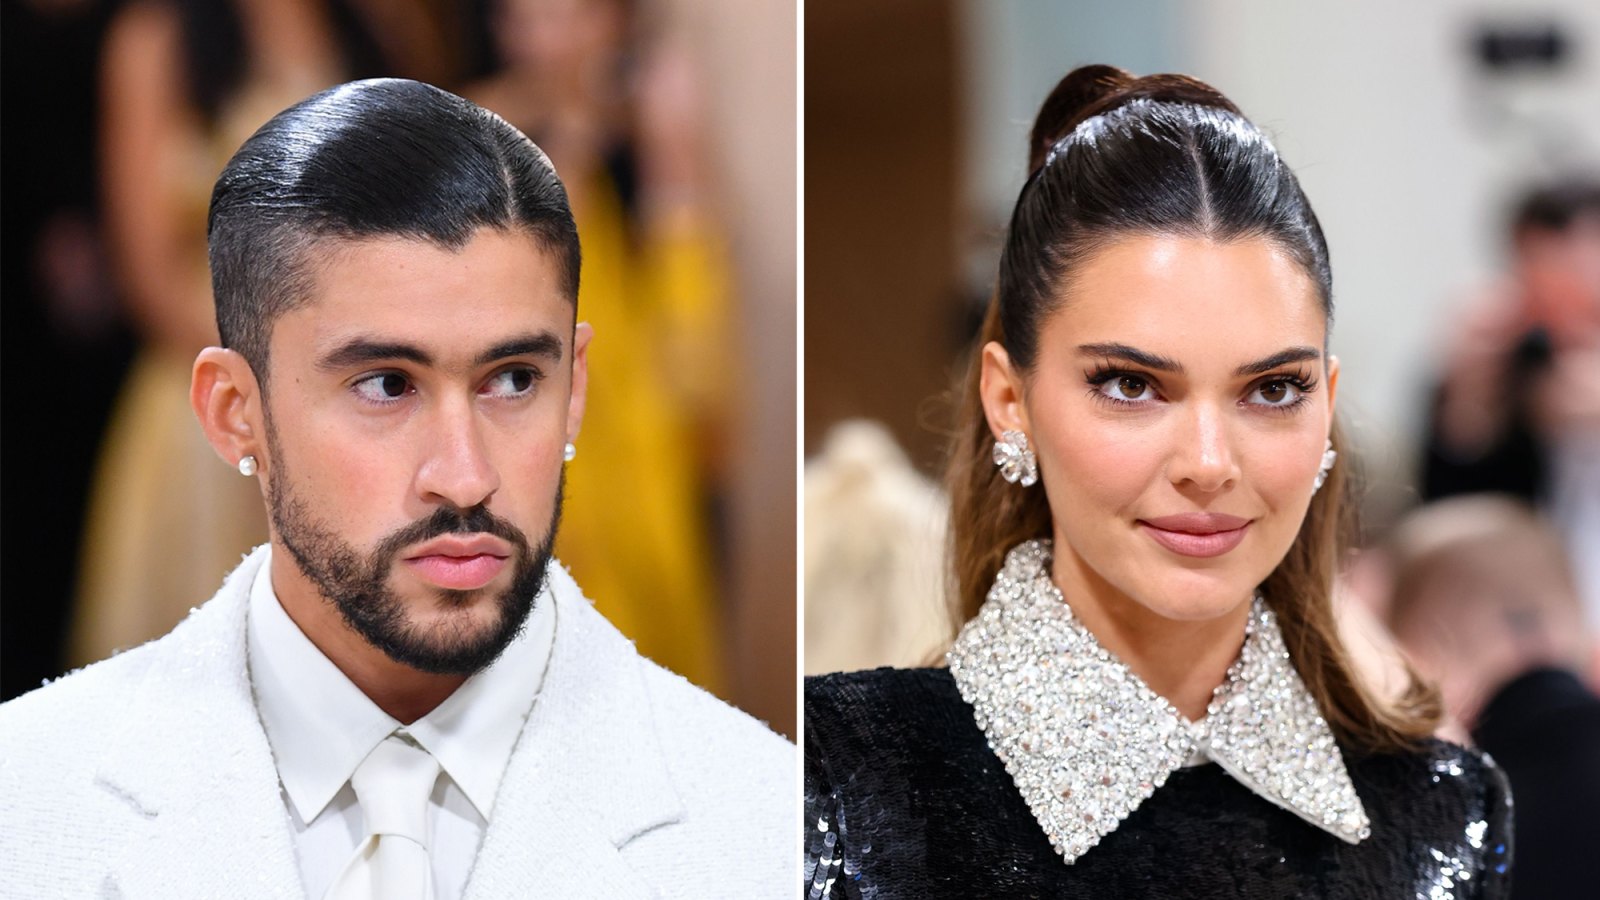 https://www.usmagazine.com/wp-content/uploads/2023/06/Bad-Bunny-Addresses-Kendall-Jenner-Romance-Spotted-on-Date-2.jpg?crop=0px%2C0px%2C2000px%2C1131px&resize=1600%2C900&quality=86&strip=all